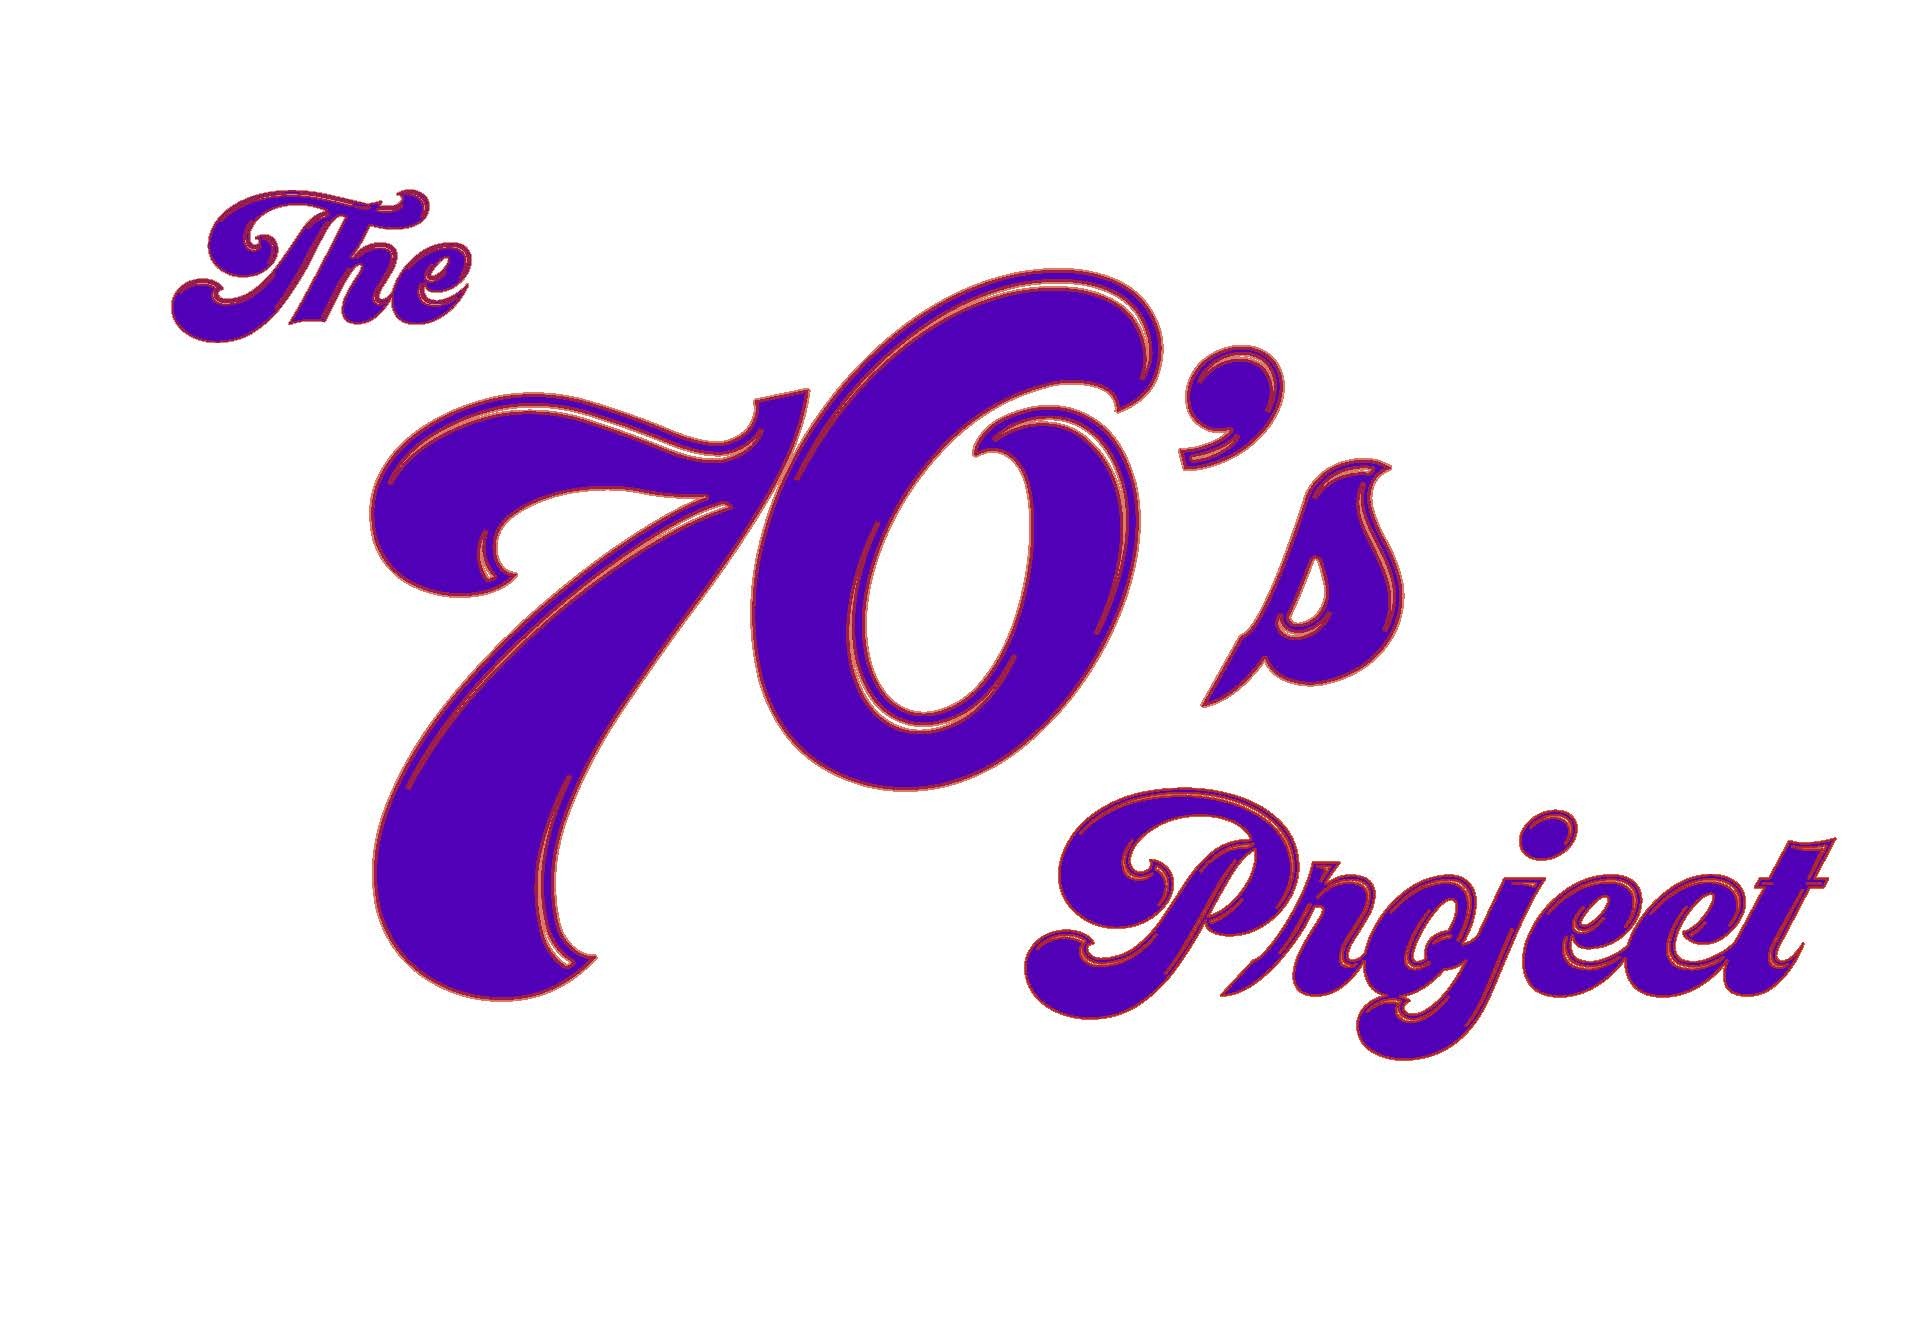 The 70's Project